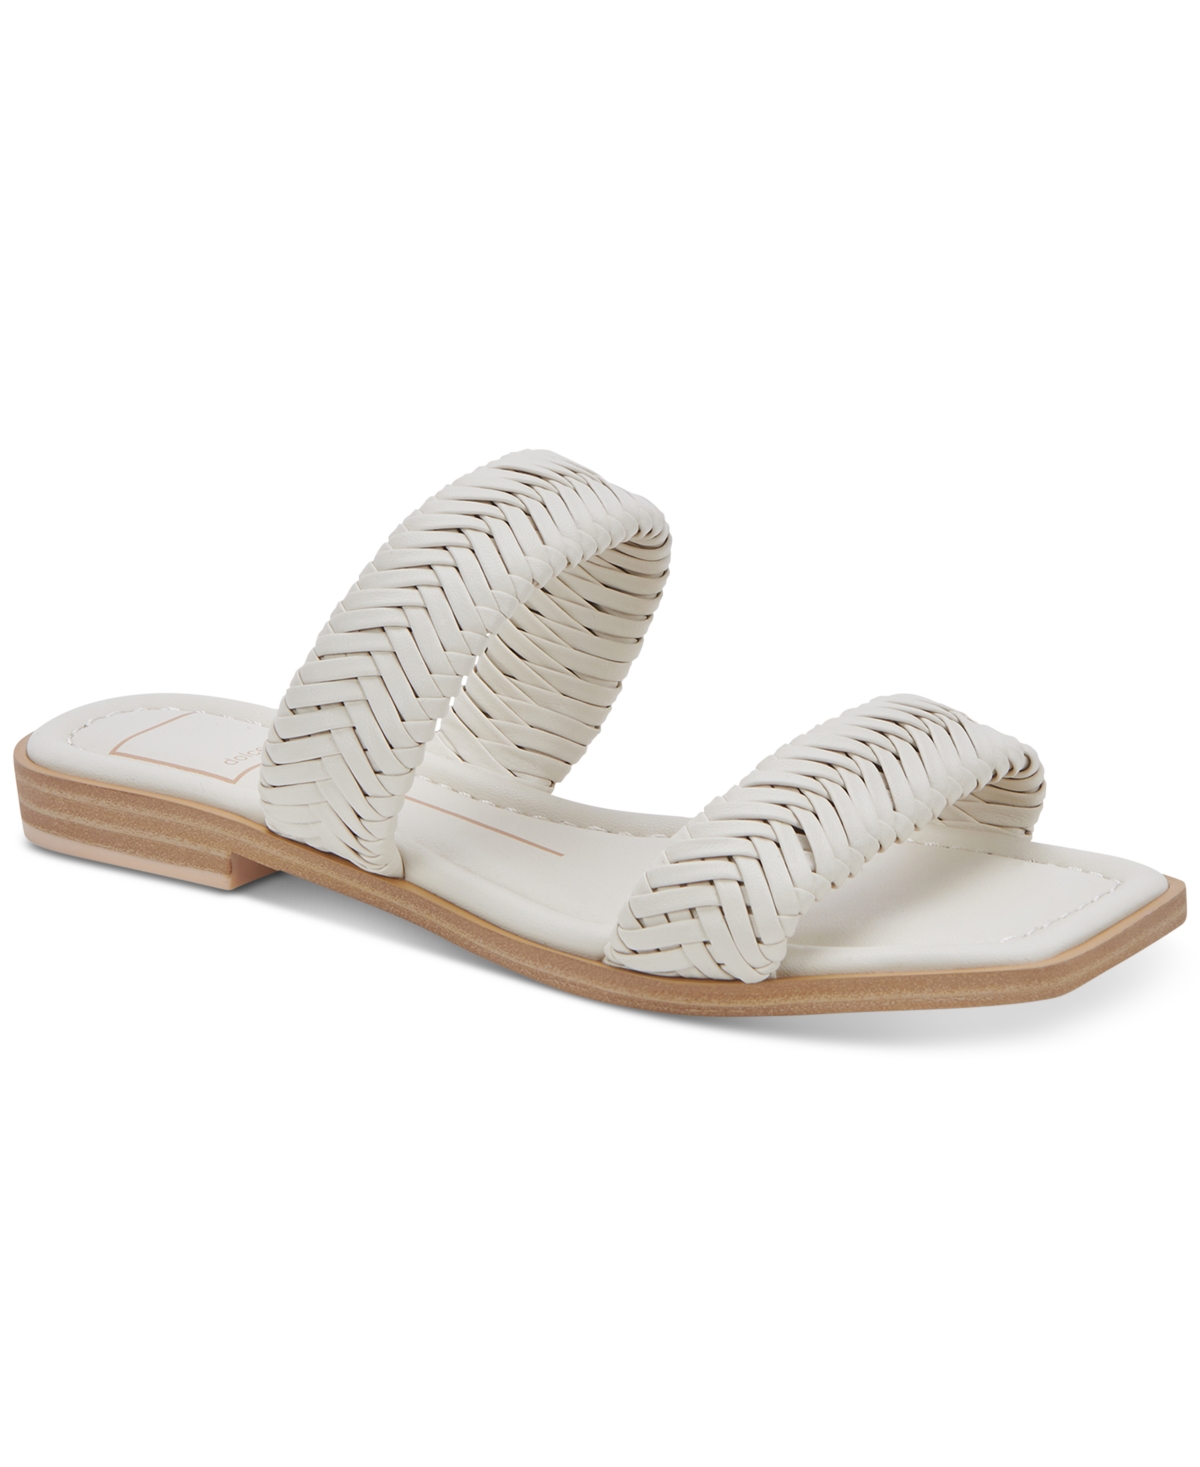 DOLCE VITA WOMEN'S INYA STRAPPY WOVEN SLIDE SANDALS WOMEN'S SHOES